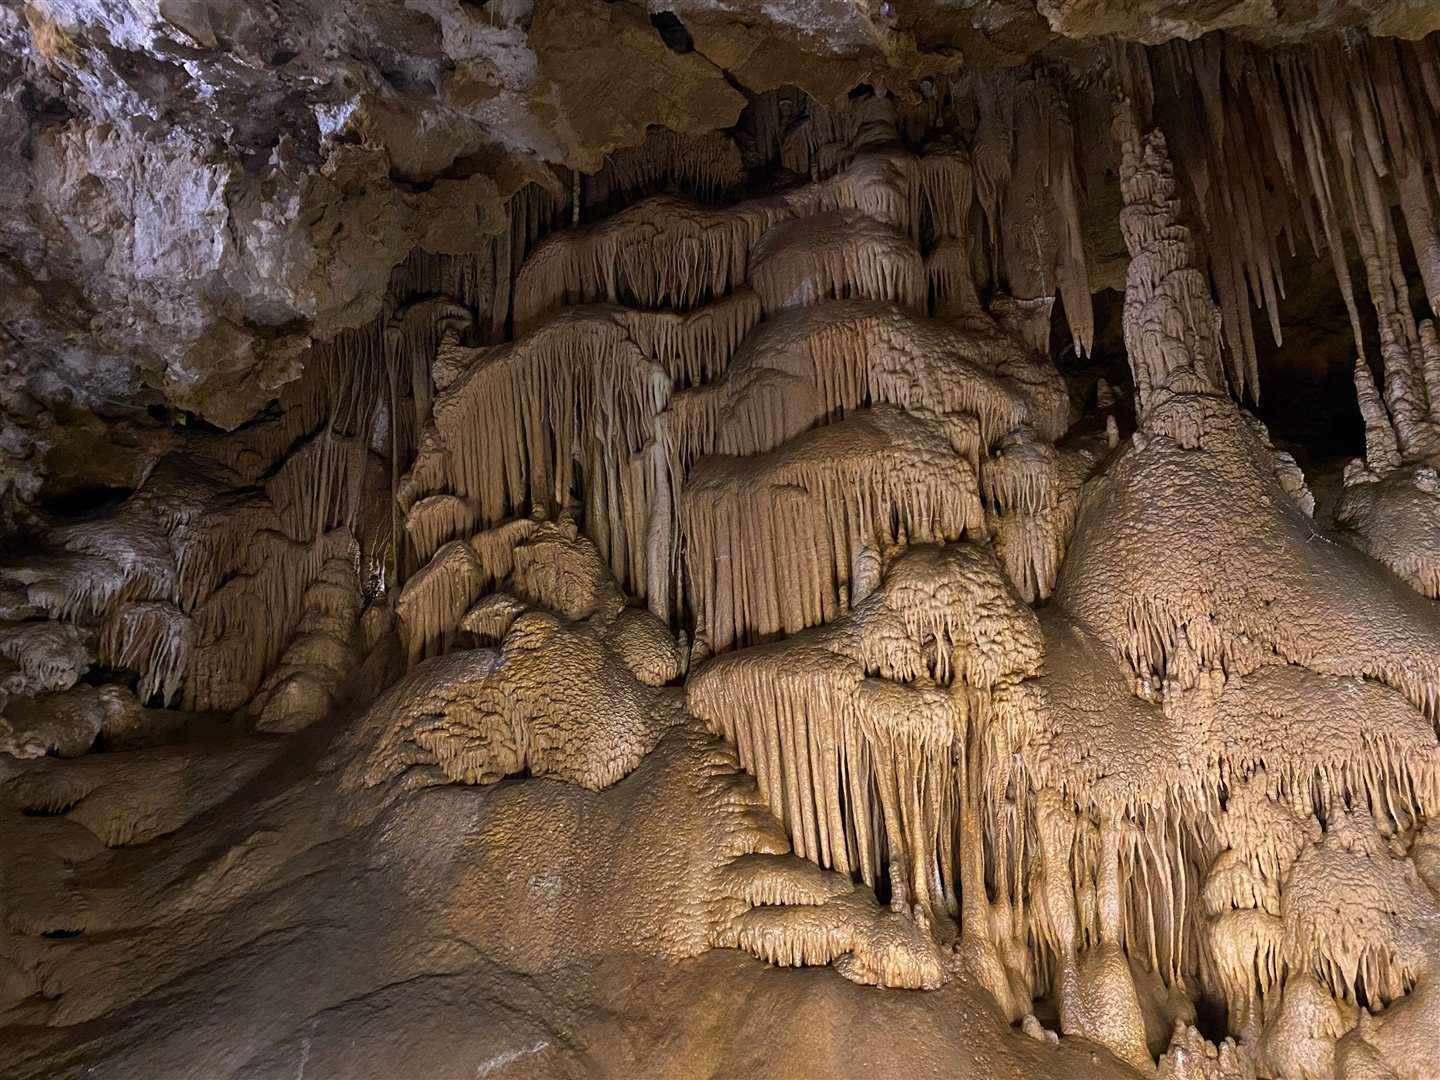 Karaca Cave is in a world of its own